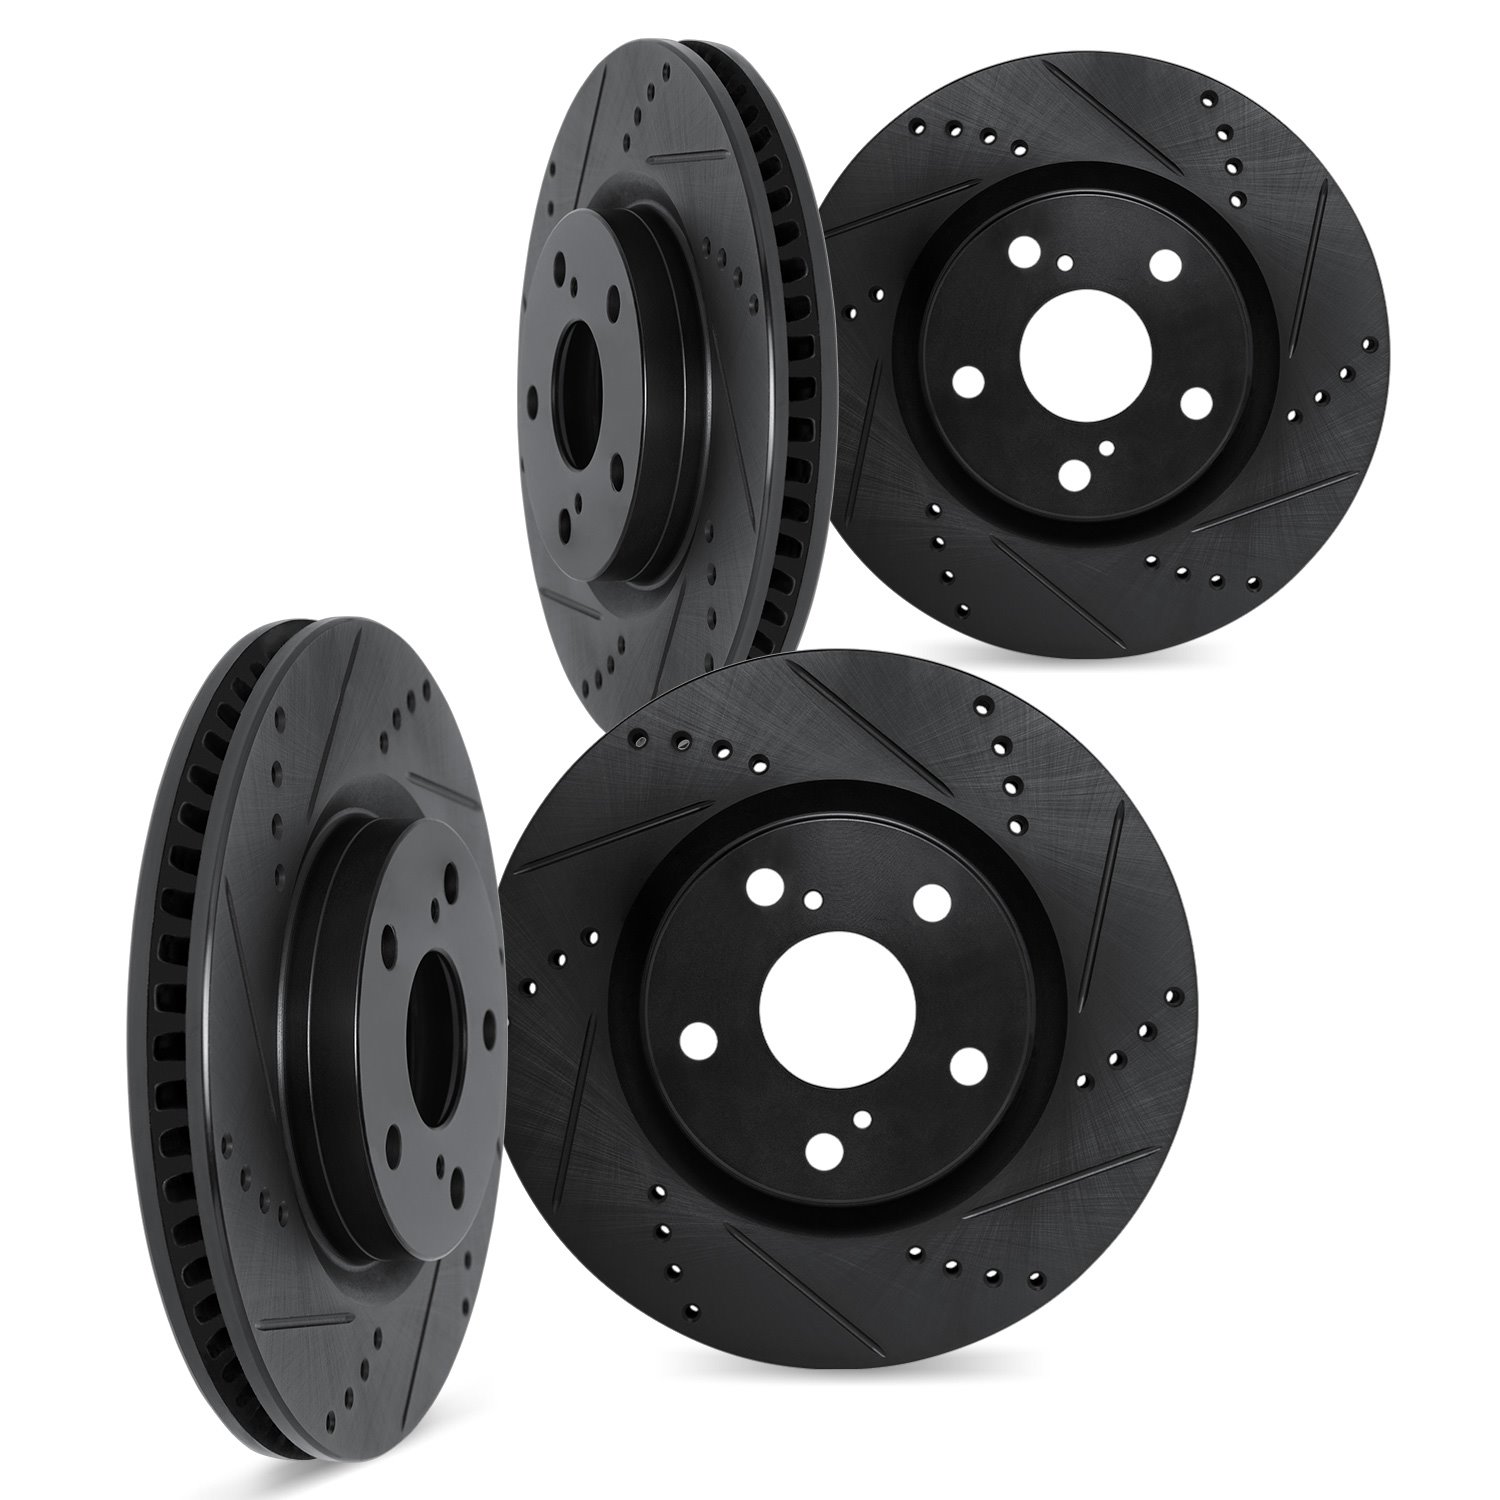 8004-74015 Drilled/Slotted Brake Rotors [Black], 2000-2006 Audi/Volkswagen, Position: Front and Rear